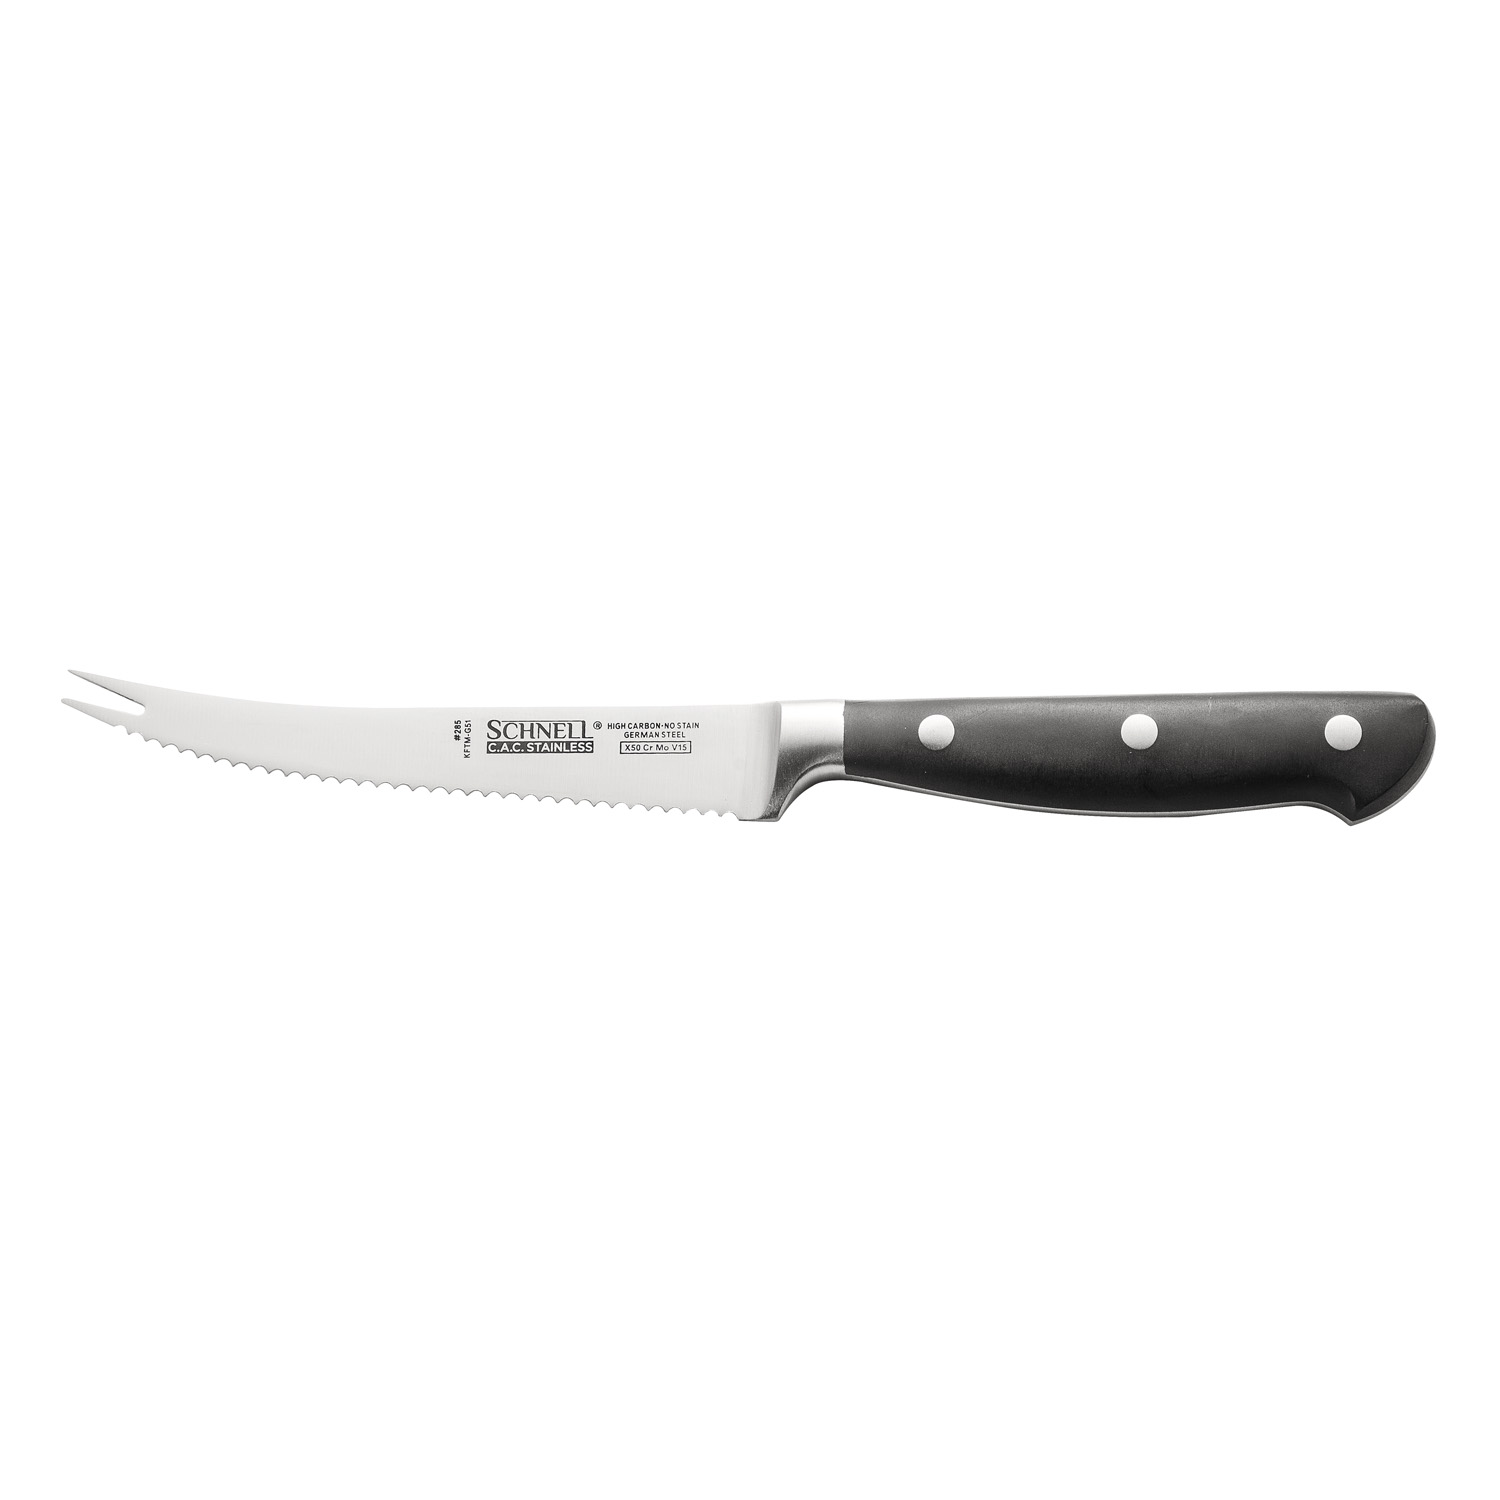 CAC China KFTM-G51 Schnell Tomato Knife 5"